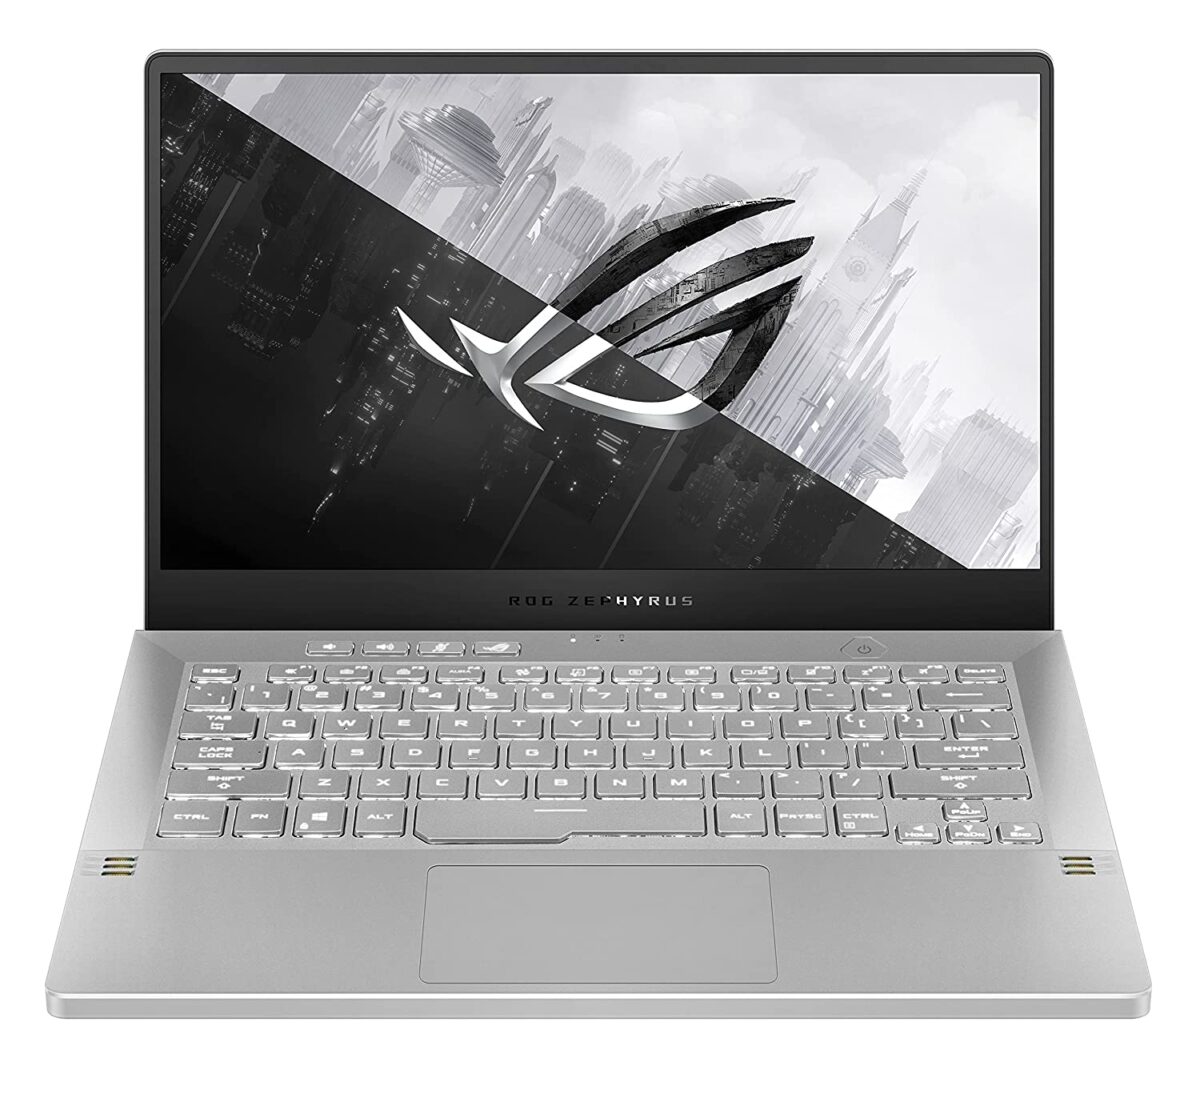 Asus ROG Zephyrus G14 2021 RTX 3050 Ti Price in India | Launching in ...